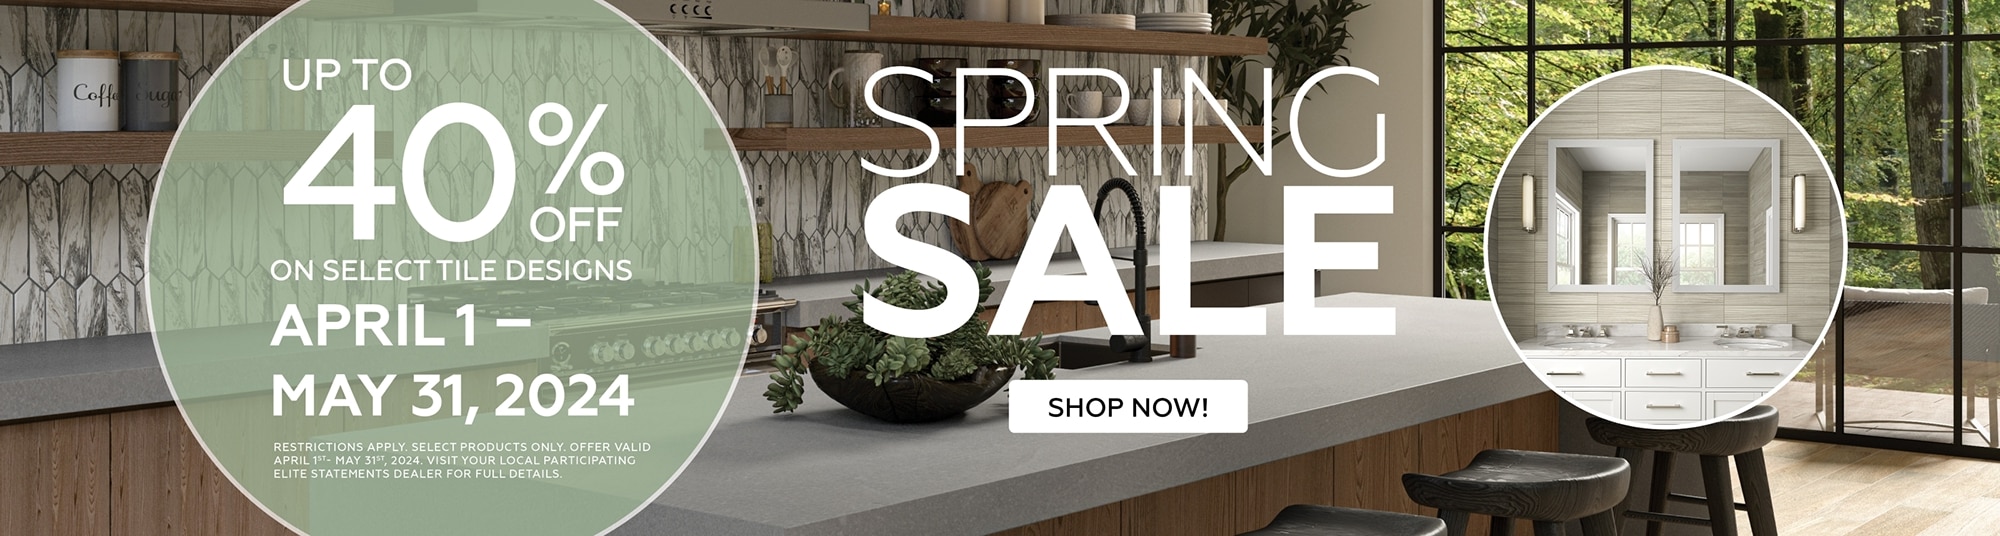 Spring Tile Sale Up to 40 percent off on select tile designs April through May